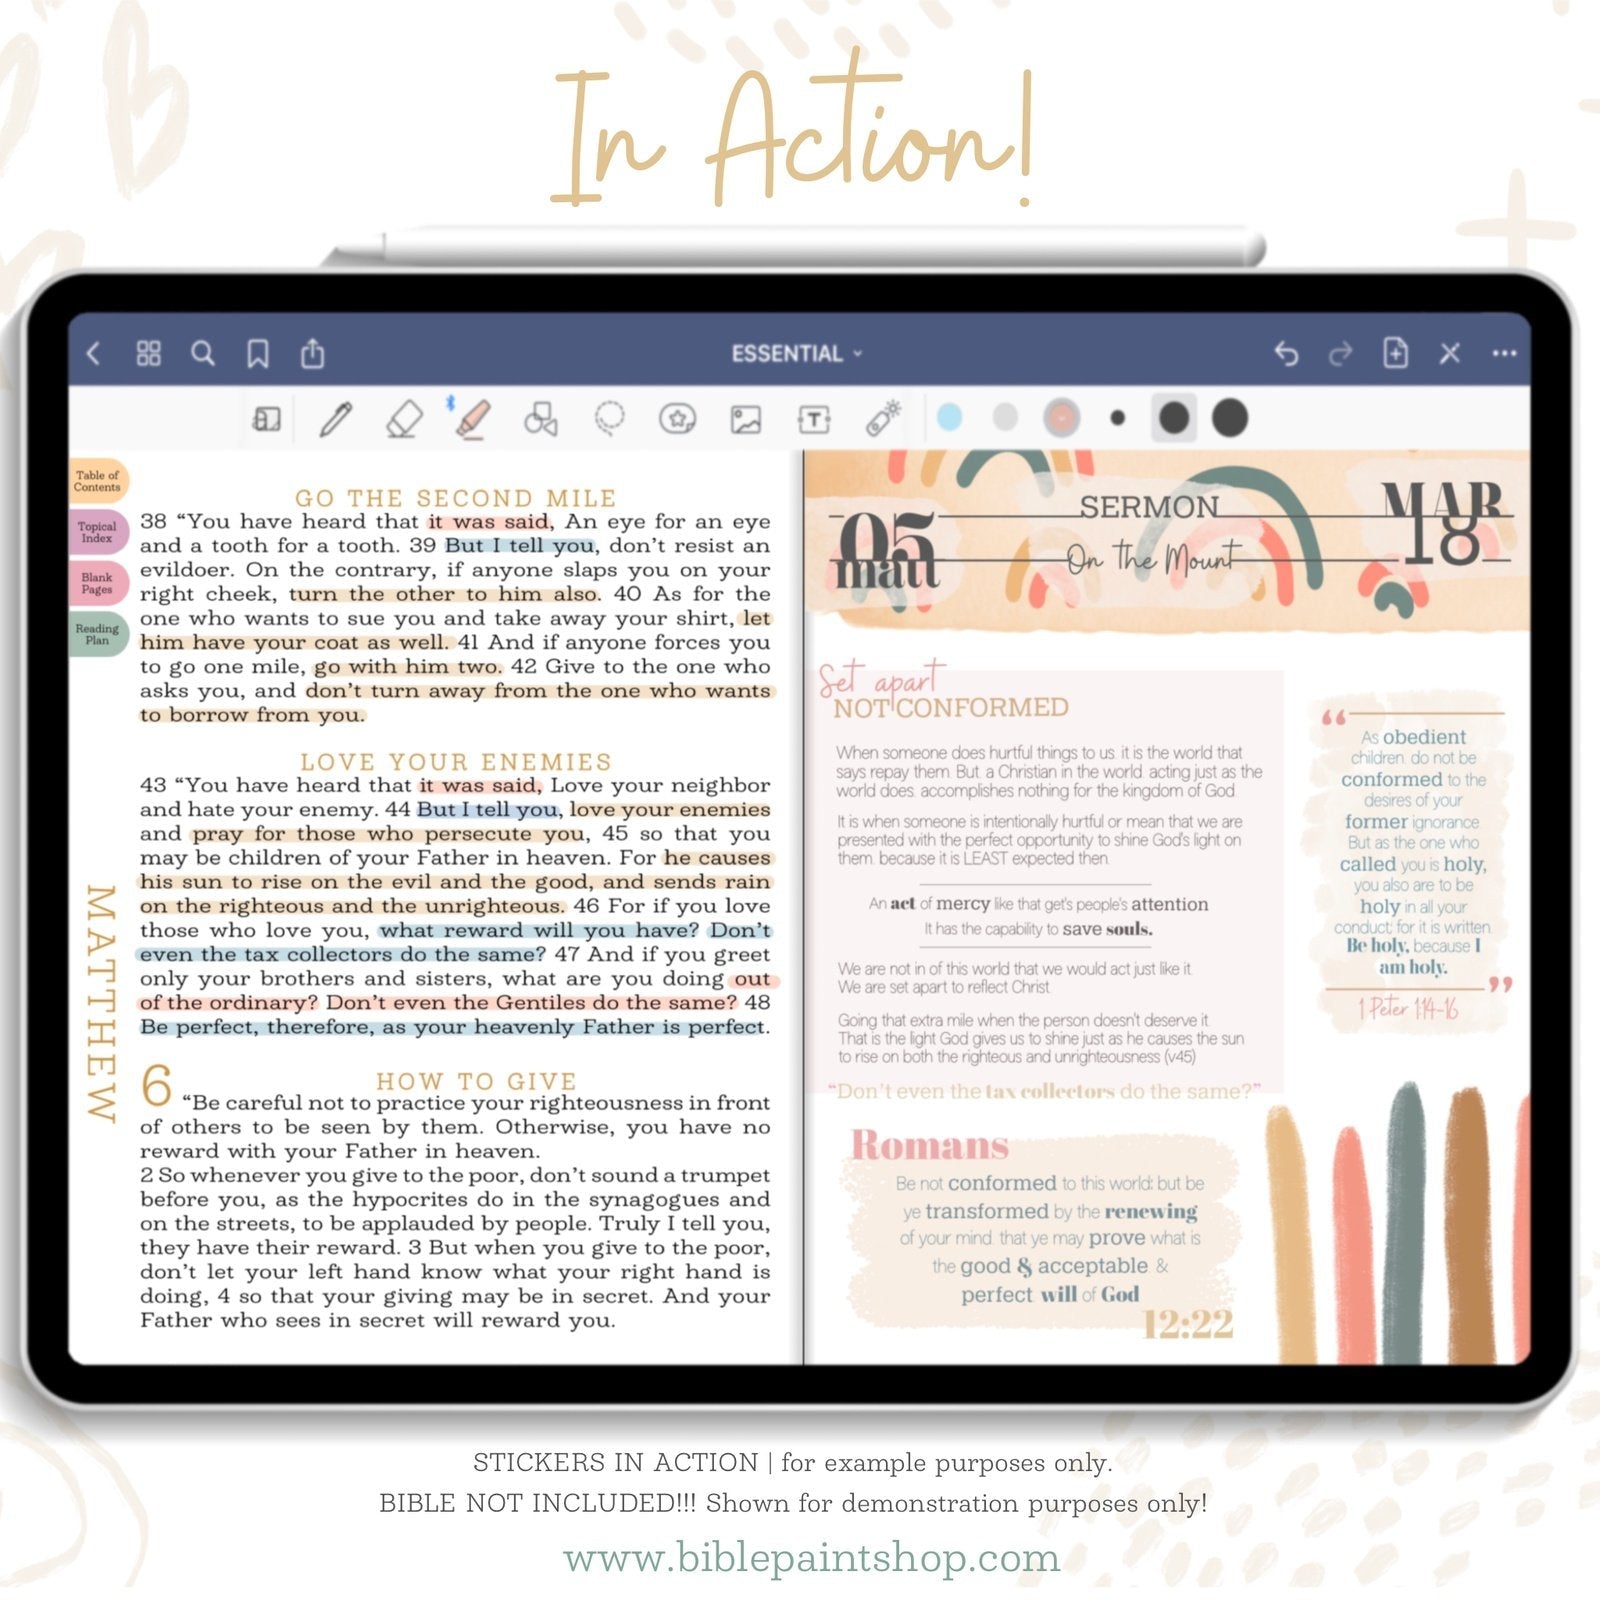 Digital Stickers | Abstracts & Strokes - Bible Paintshop